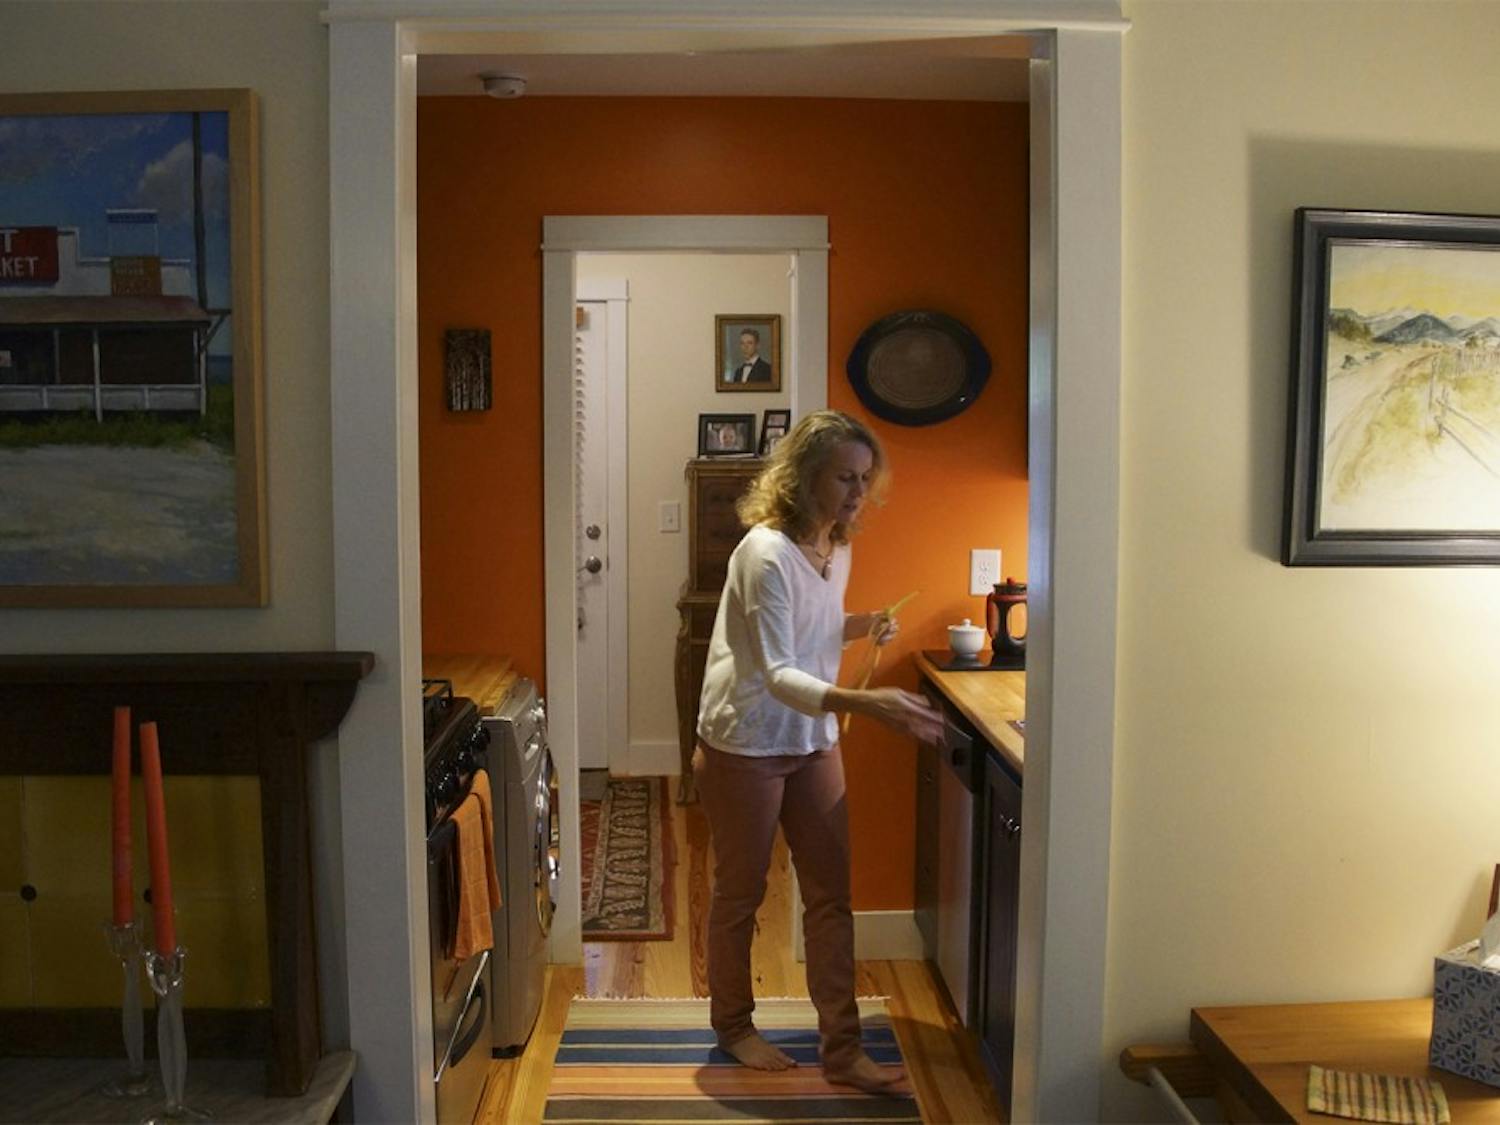 View of the kitchen and back door from inside Bethany Chaney's small Carrboro home